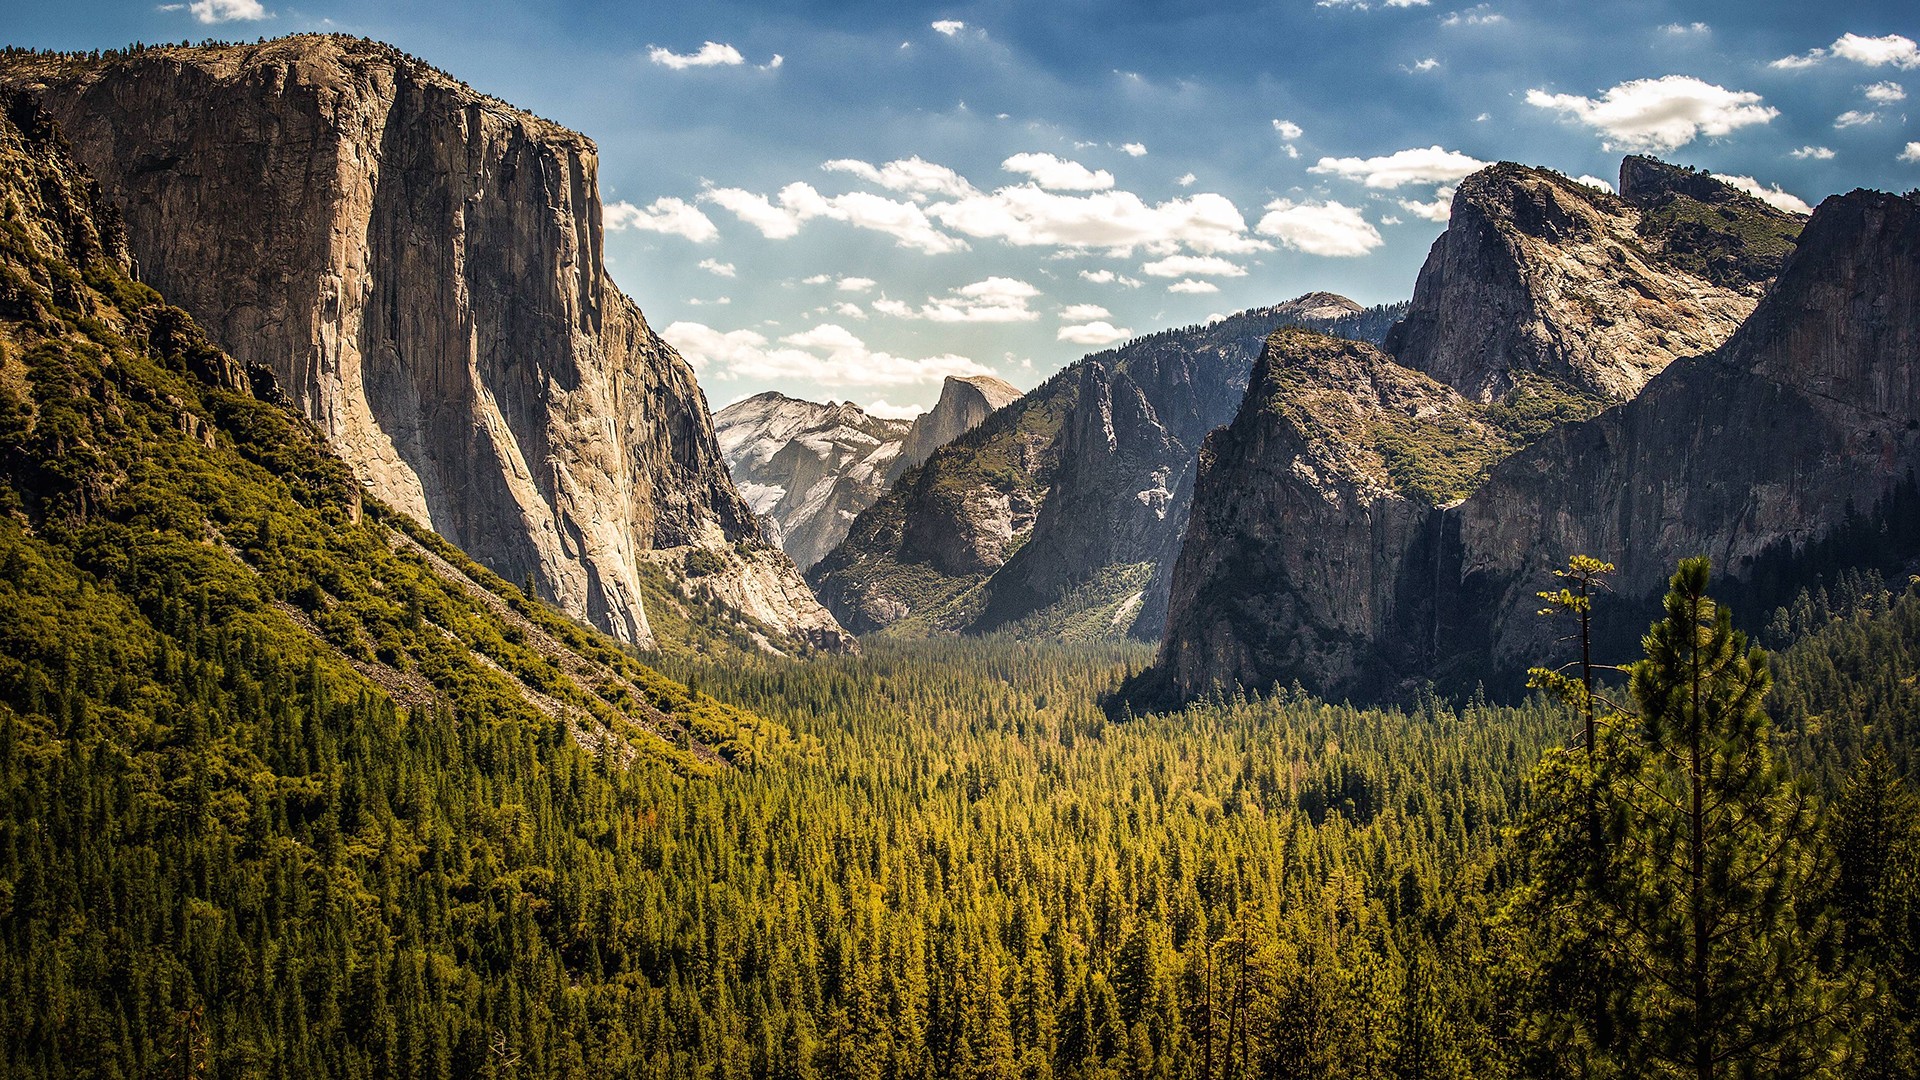 General 1920x1080 nature landscape trees mountains clouds sky valley cliff USA national park forest Yosemite National Park California El Capitan